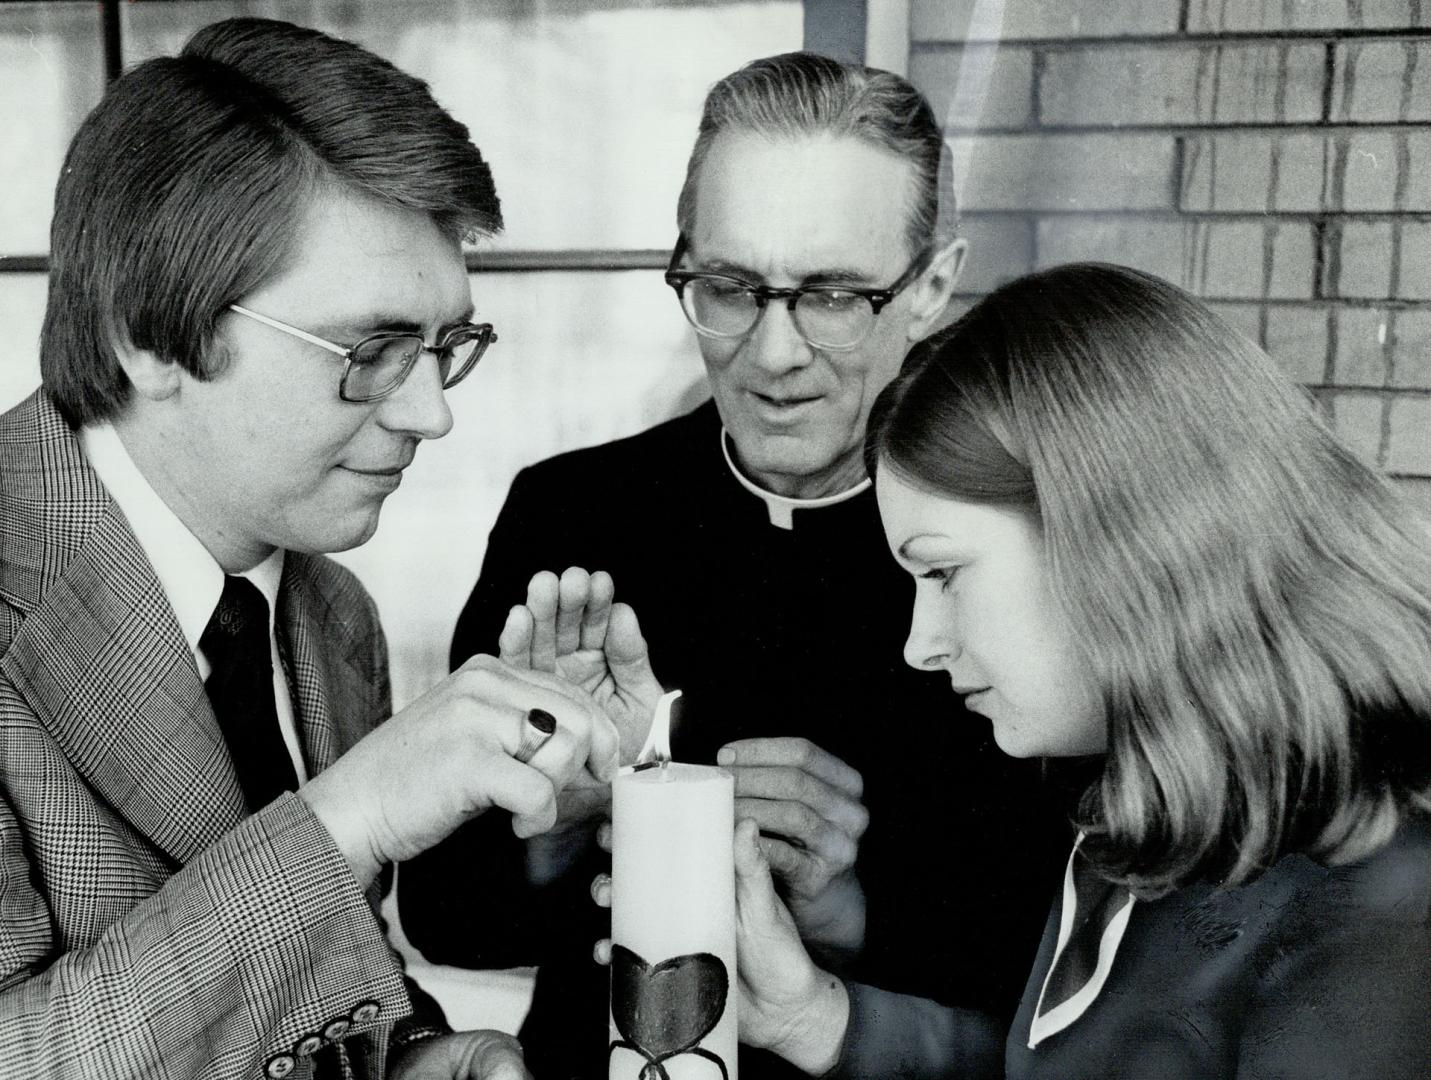 John and Mary Huff are seen with Father Patrick German and are lighting a candle, a symbol of marriage encounter program priest conducts. The Huffs, w(...)